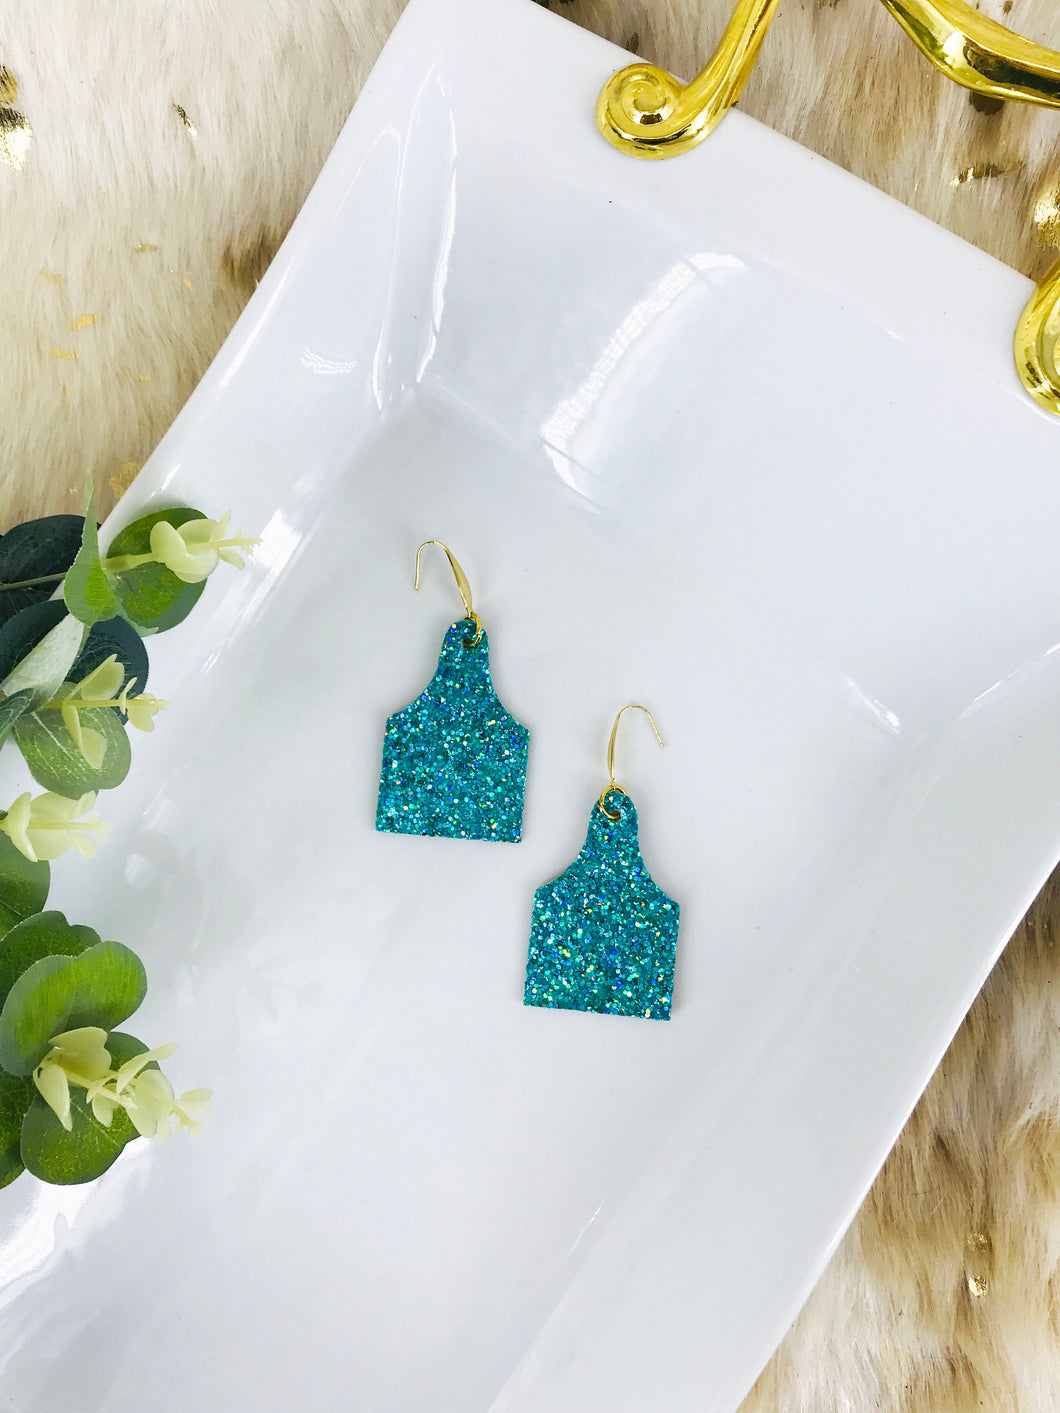 Genuine Glitter on Leather Cow Tag Earrings - E19-2789